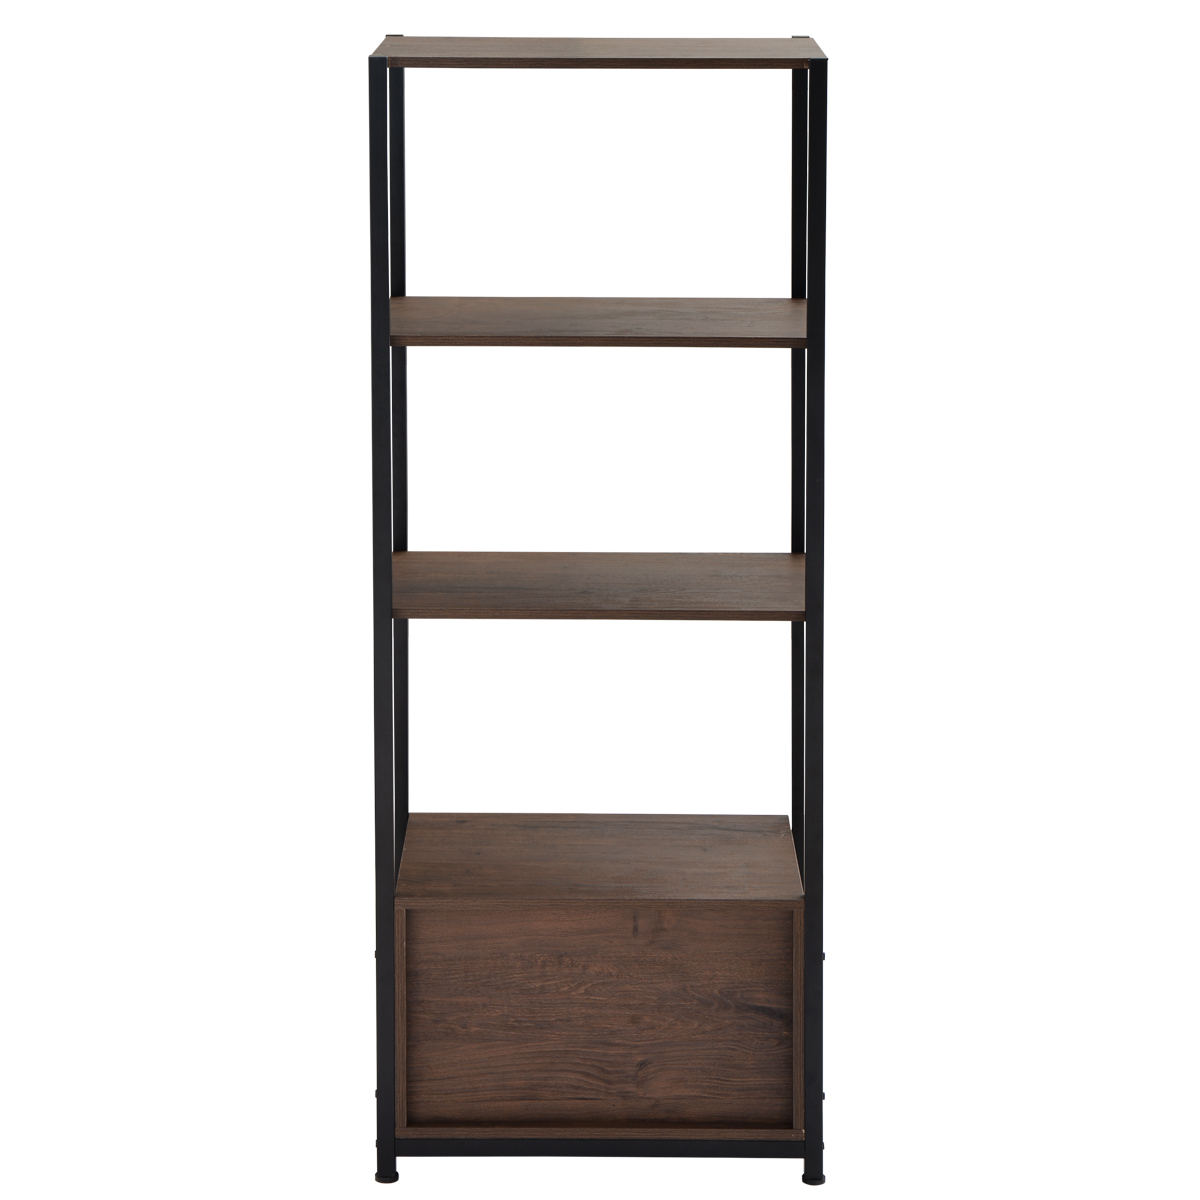 4-Tier Bookshelf with 4 Storage Shelves and Two Drawers - PP295216DAA